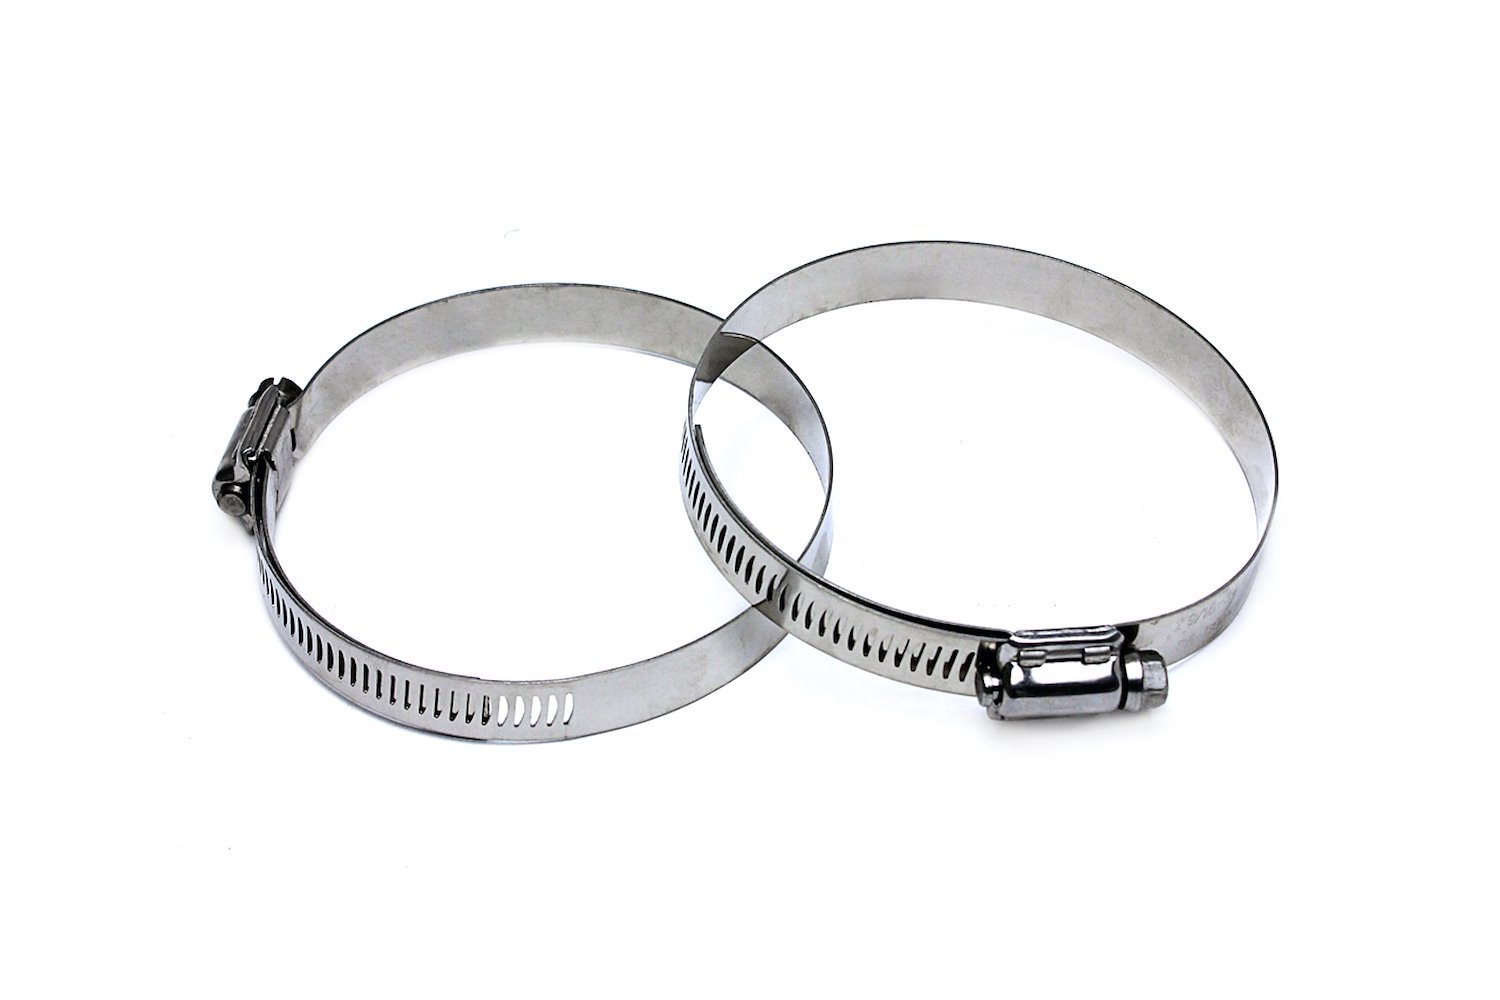 SSWC-59-83x2 Stainless Steel Worm Gear Hose Clamp, Effective Range: 2-5/16 in.- 3-1/4 in., 2Pc